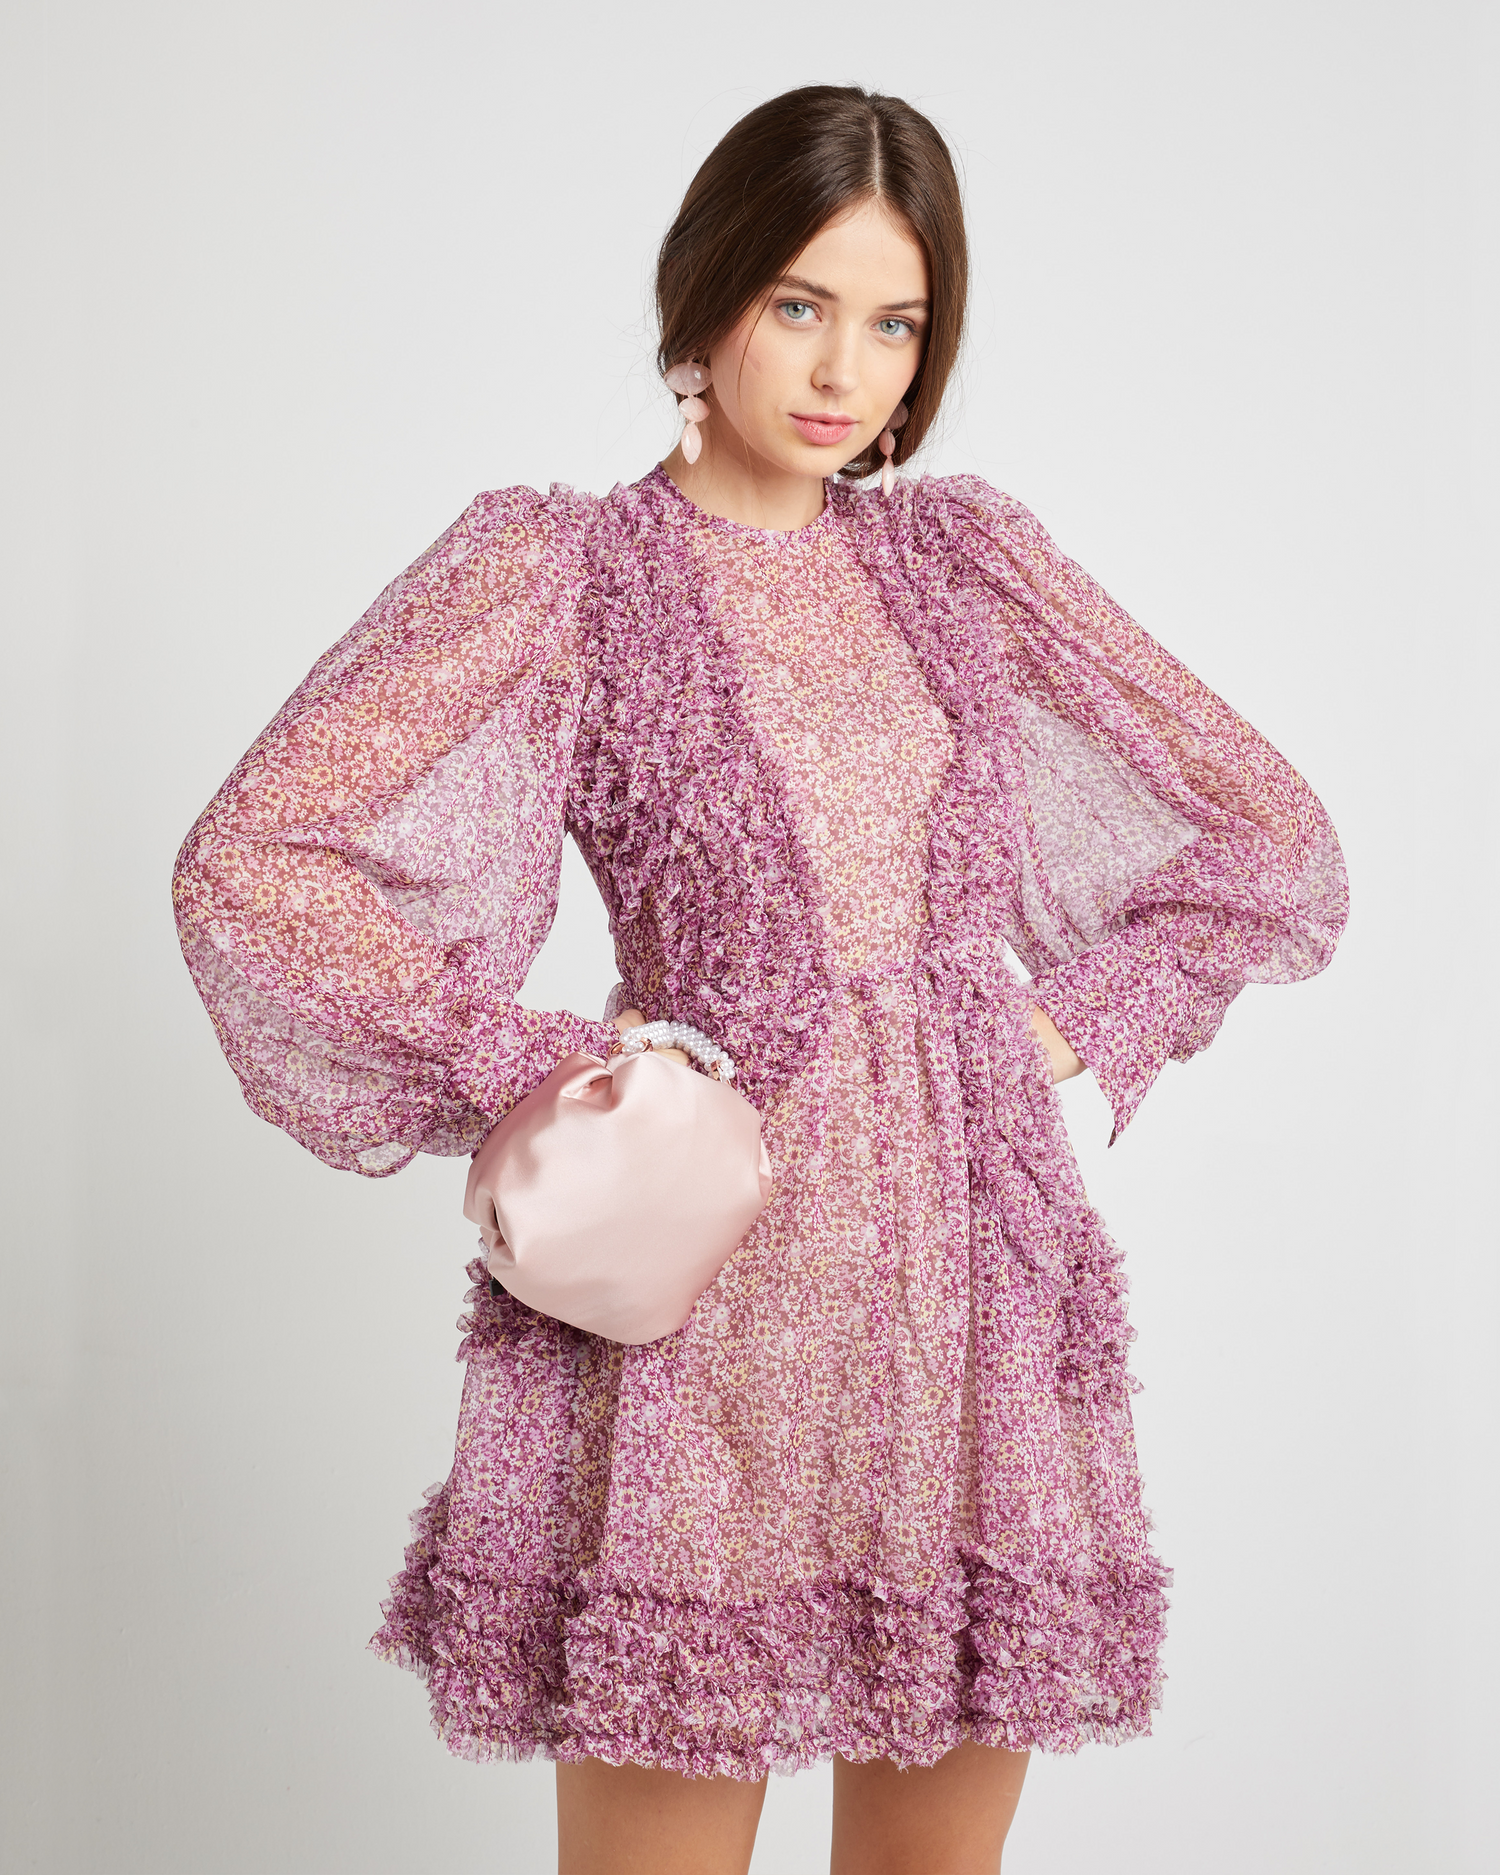 Fifth image of Bessy Dress, a pink mini dress, sheer and floral printed chiffon, ruffled details on bodice and skirt, long, loose puff sleeves